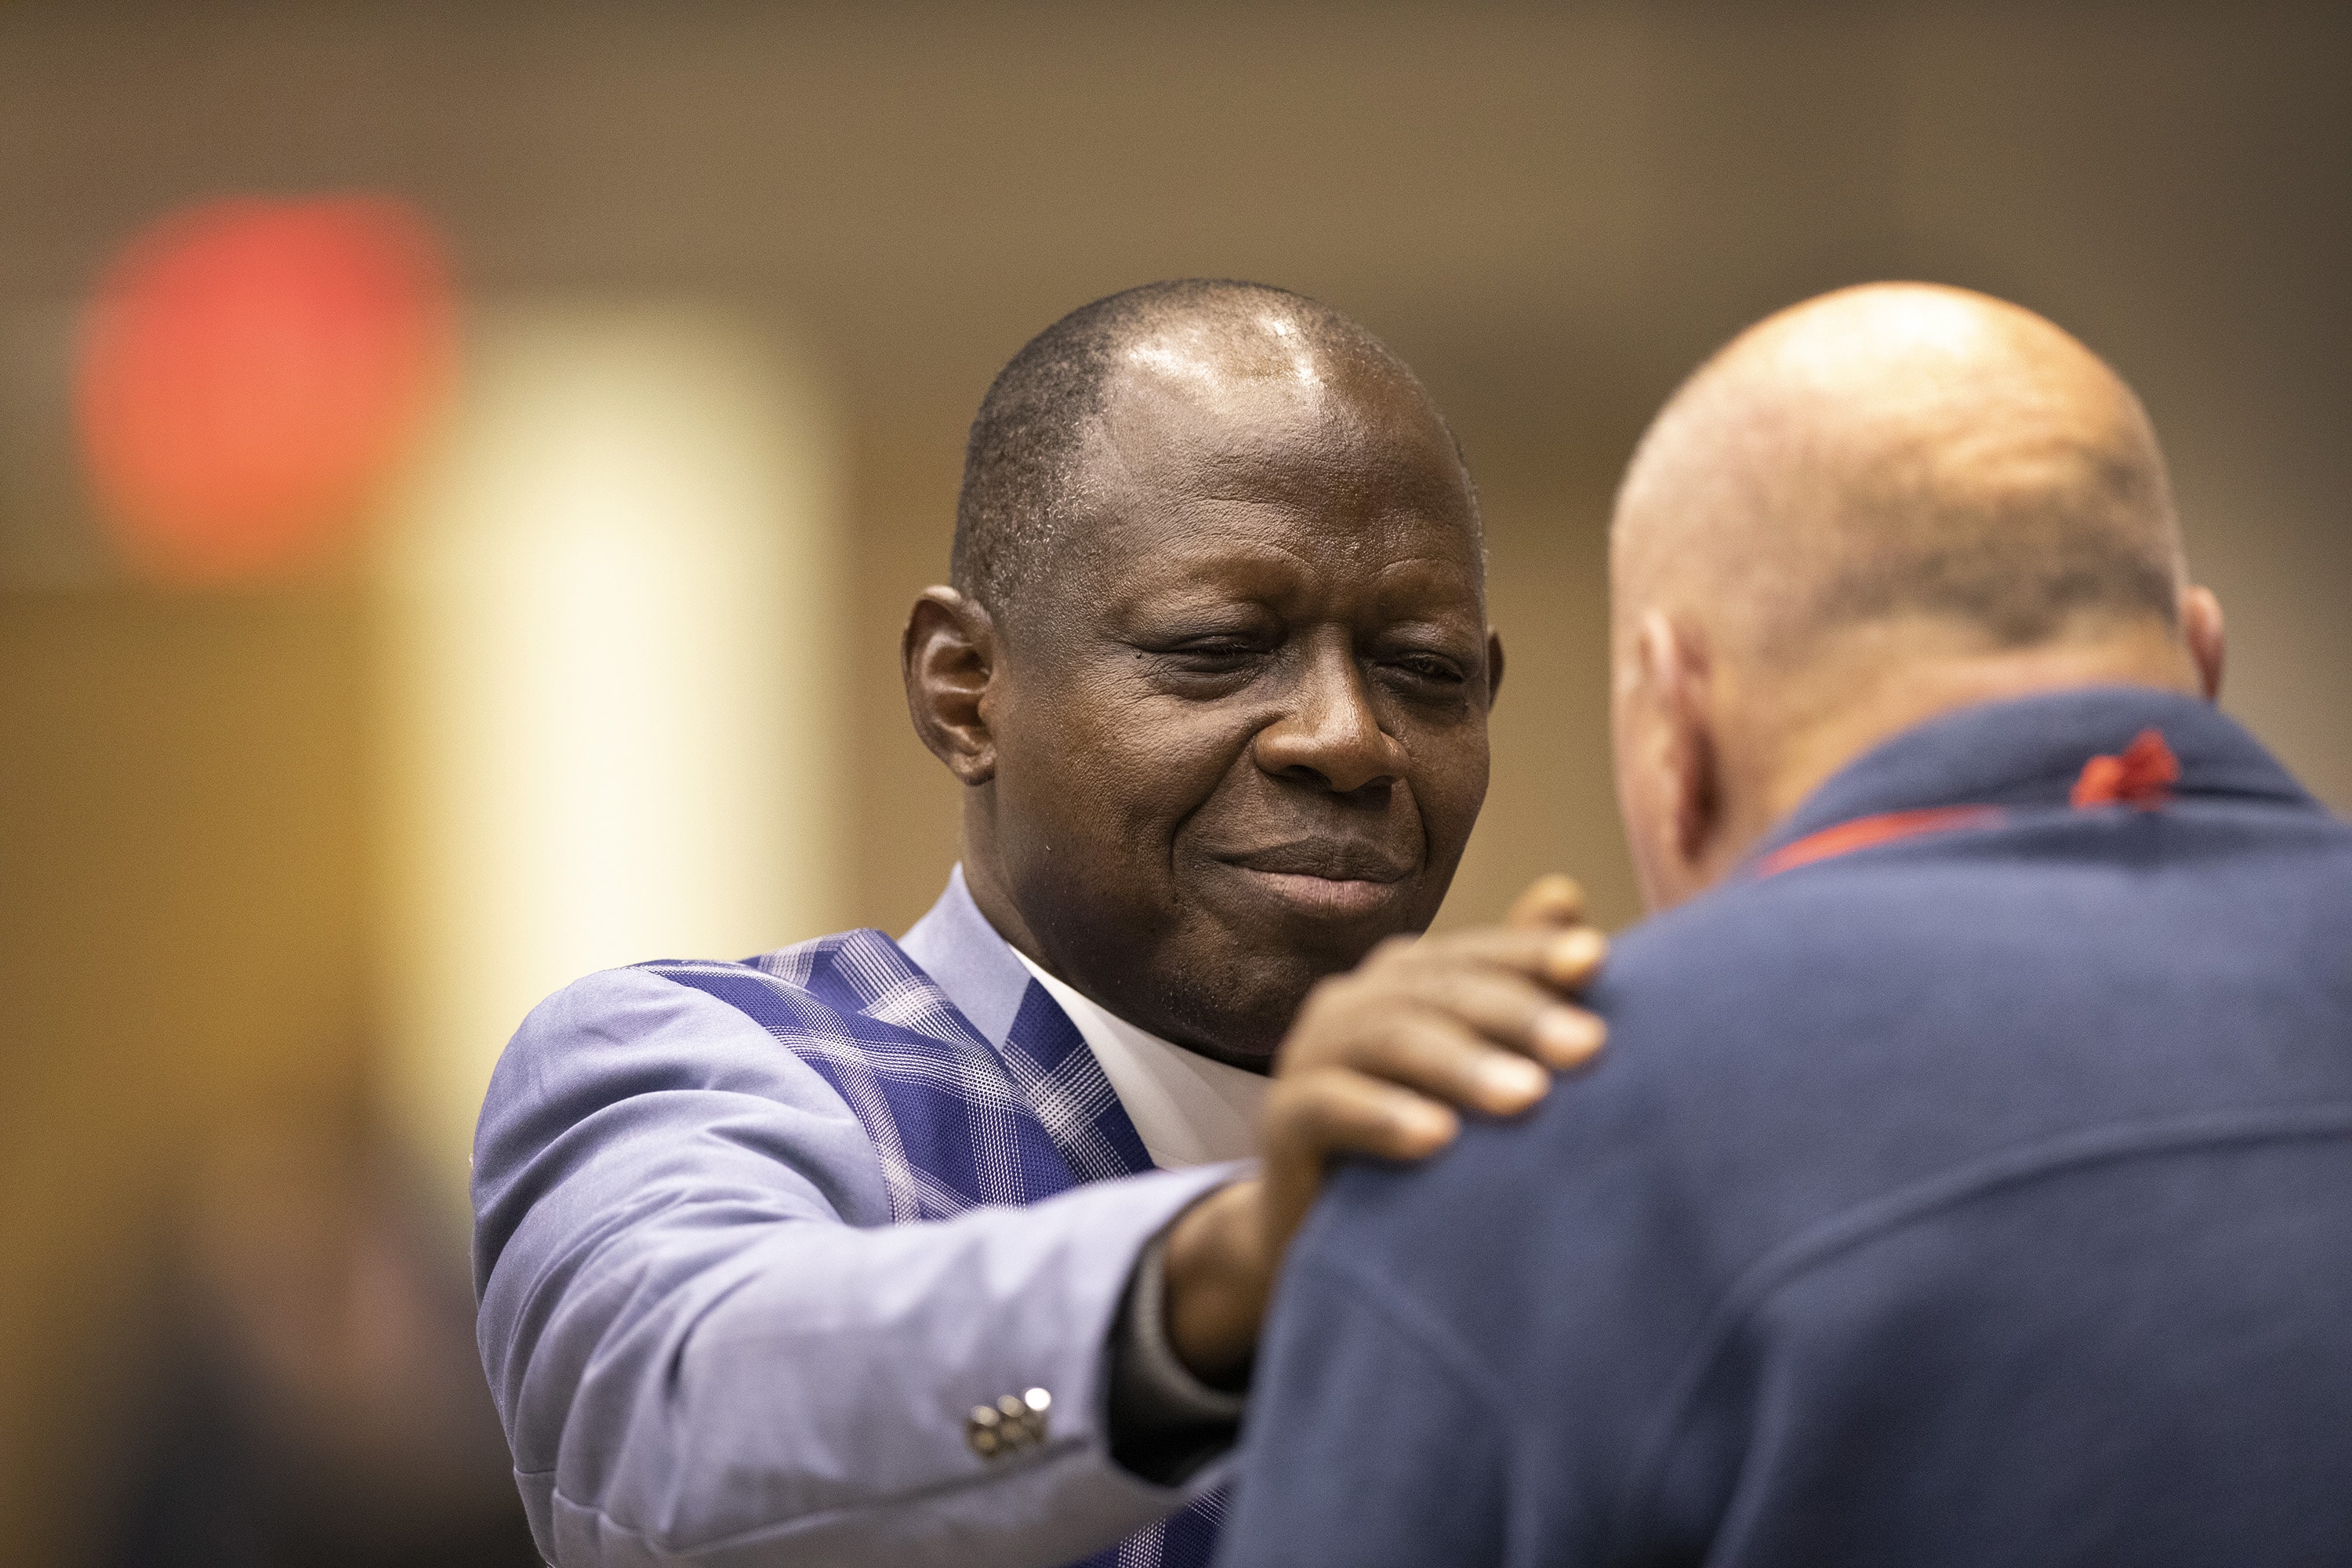 Bishop John K. Yambasu prays with the Rev. Byron Alexander, a conference page, during the 2019 General Conference in St. Louis. Photo by Kathleen Barry, UMNS.